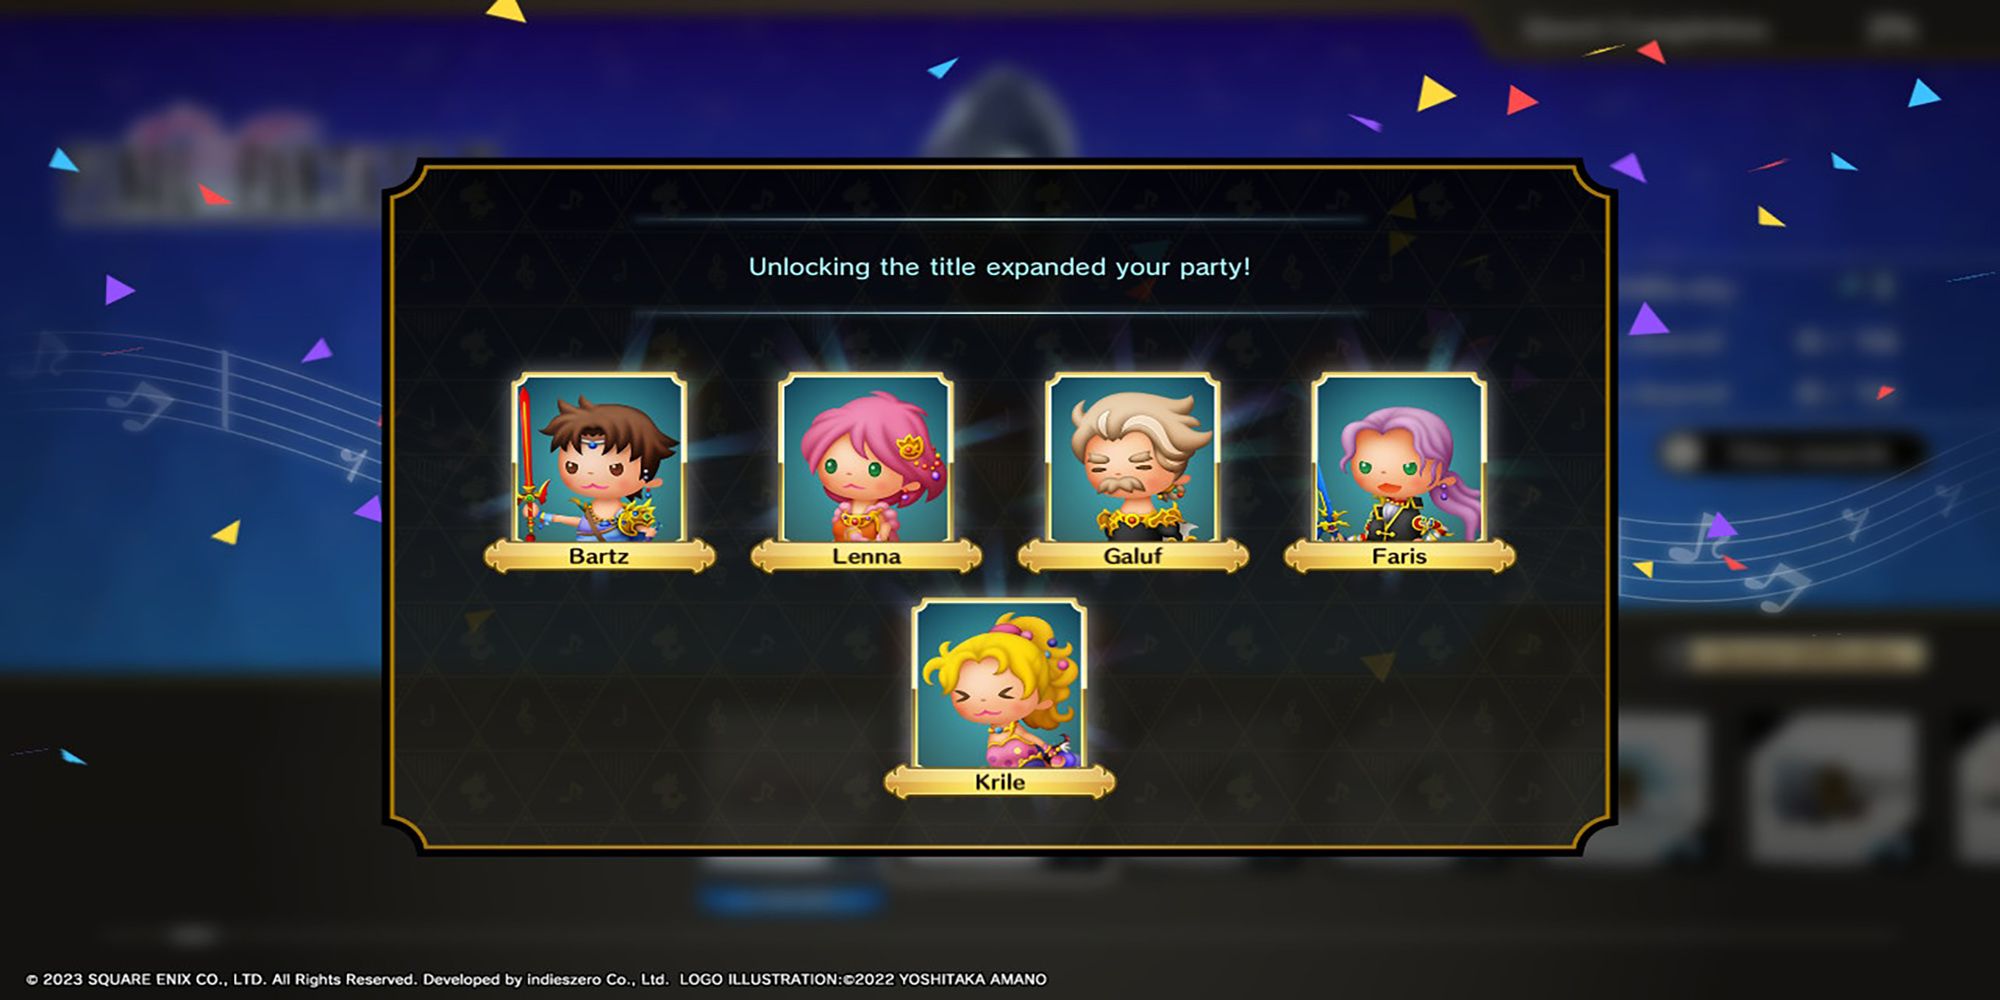 A group of Final Fantasy 5 characters, Bartz, Lenna, Galuf, Faris, and Krile, get unlocked in Theatrhythm: Final Bar Line.